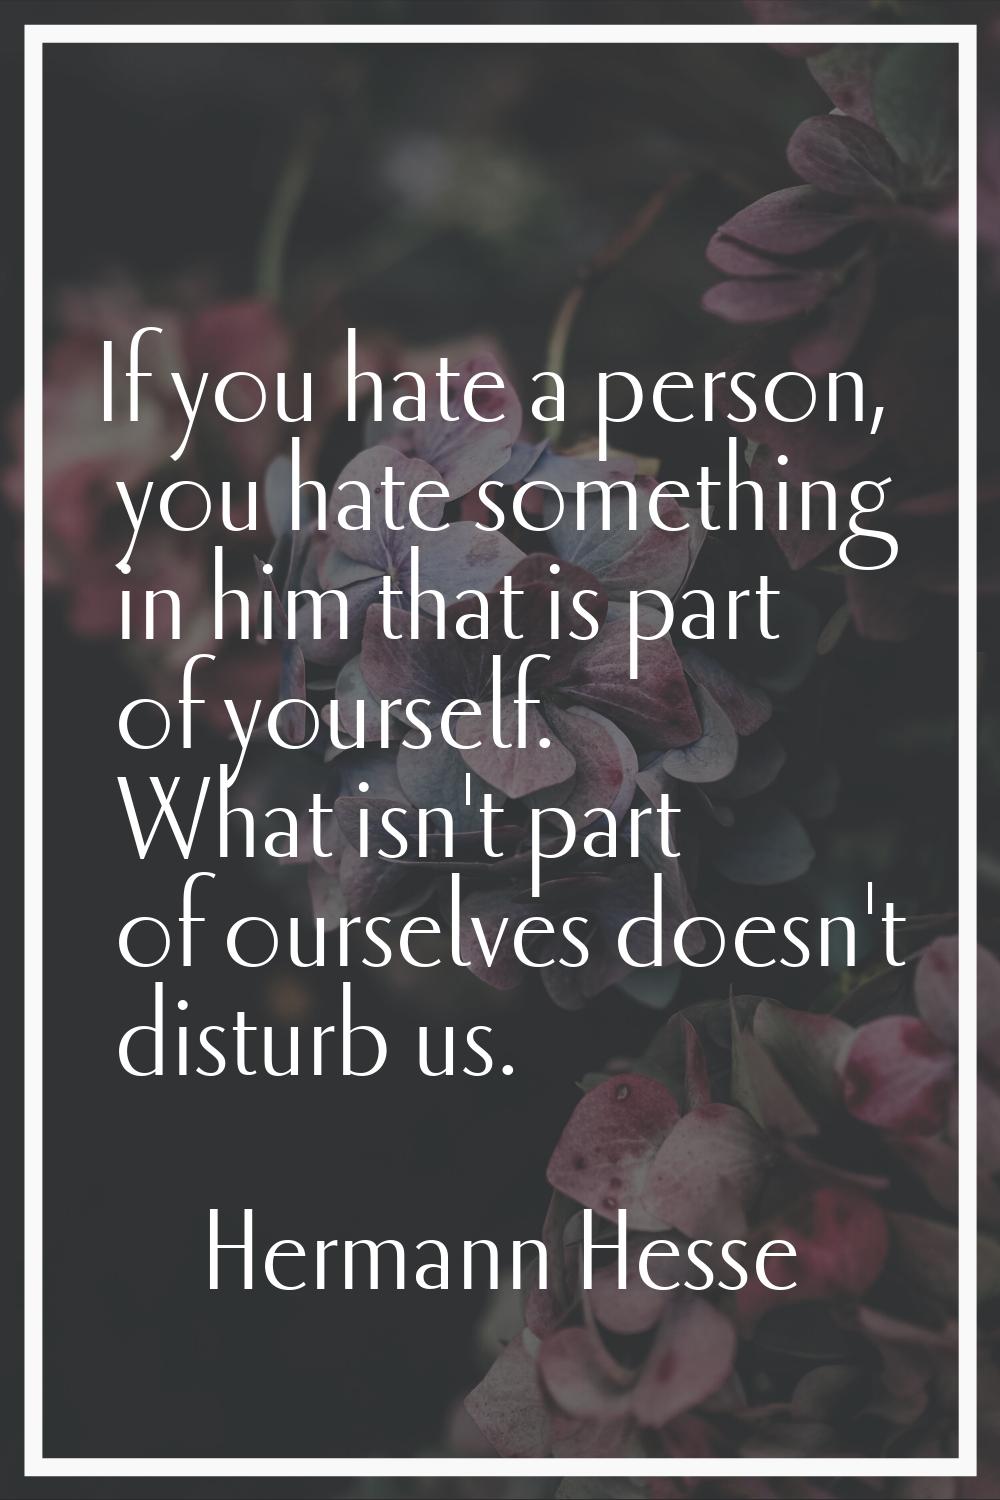 If you hate a person, you hate something in him that is part of yourself. What isn't part of oursel